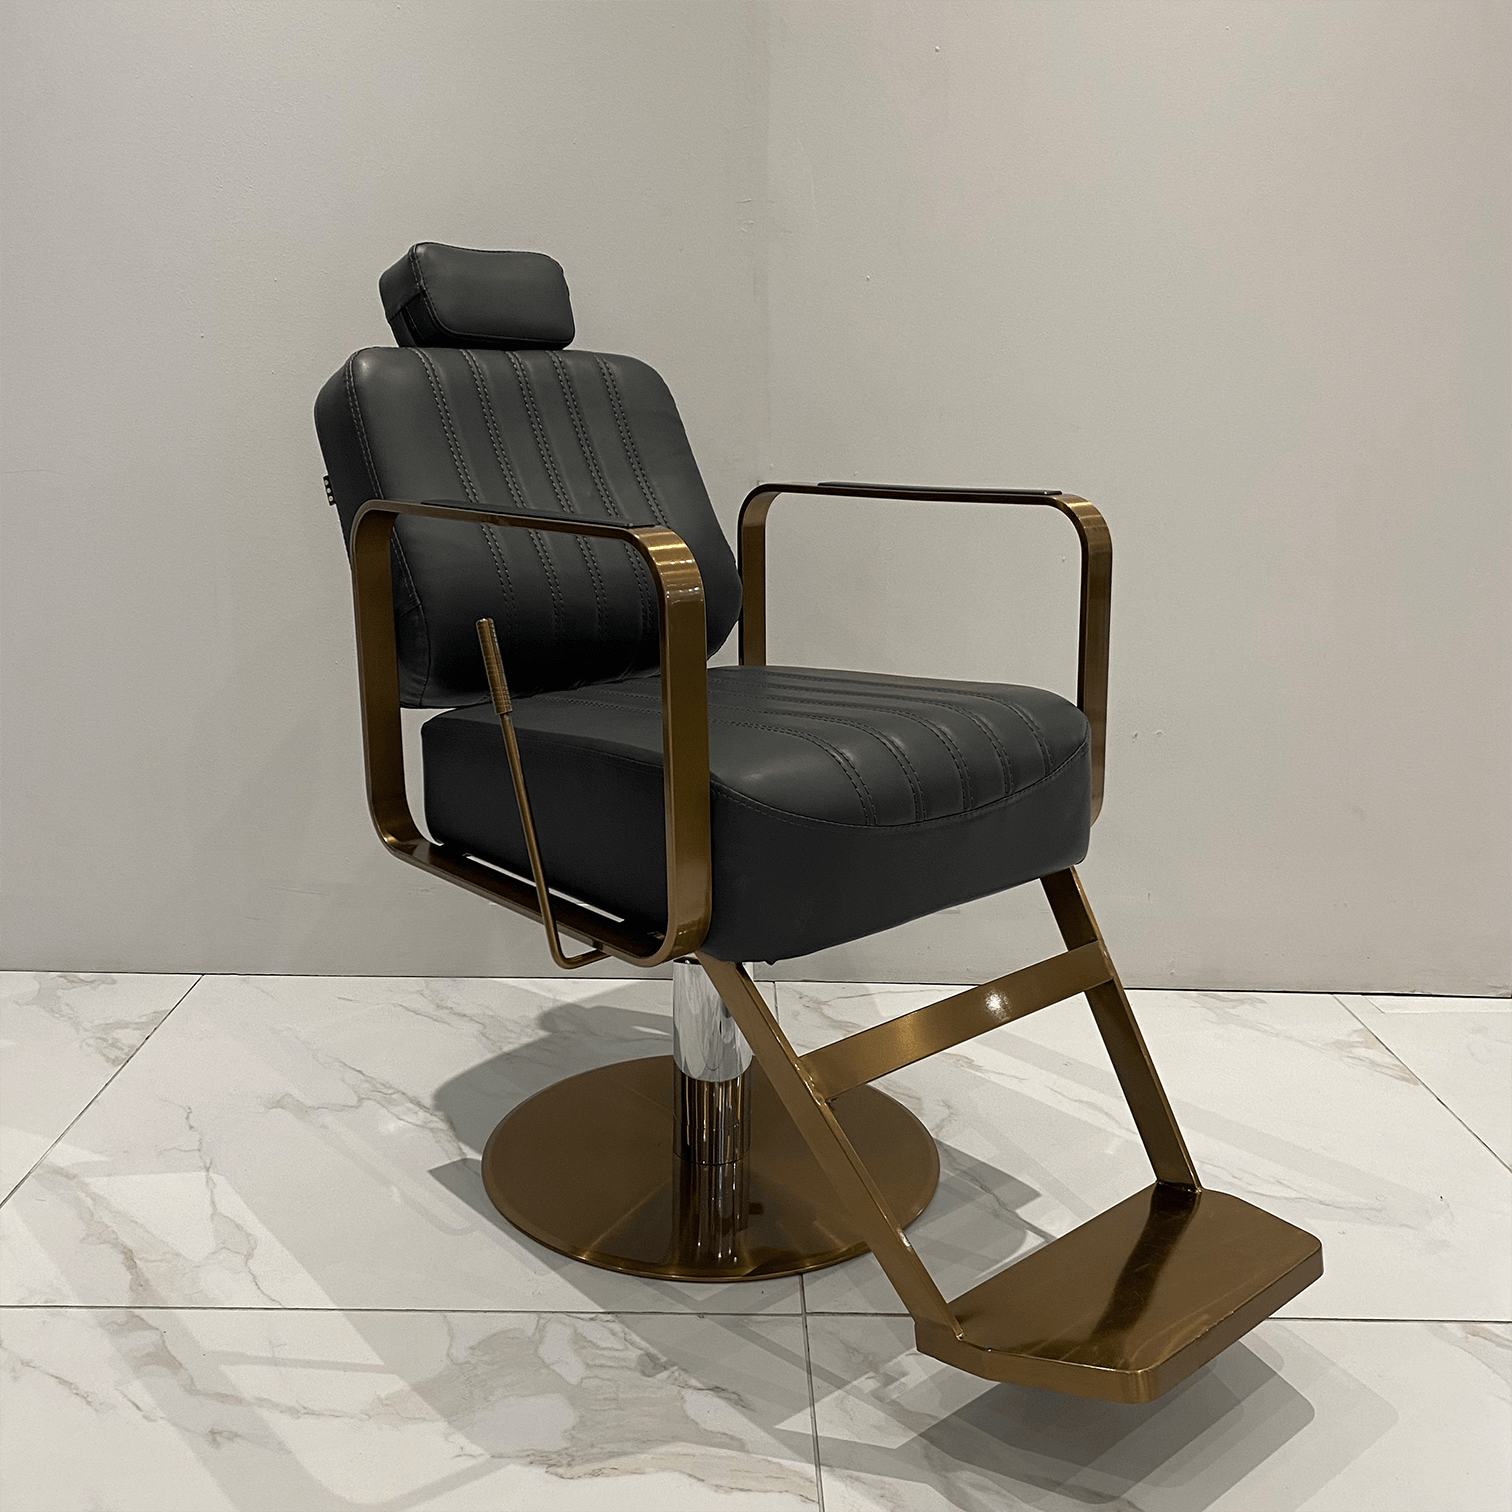 The Vinni Reclining Chair - Charcoal & Copper by SEC